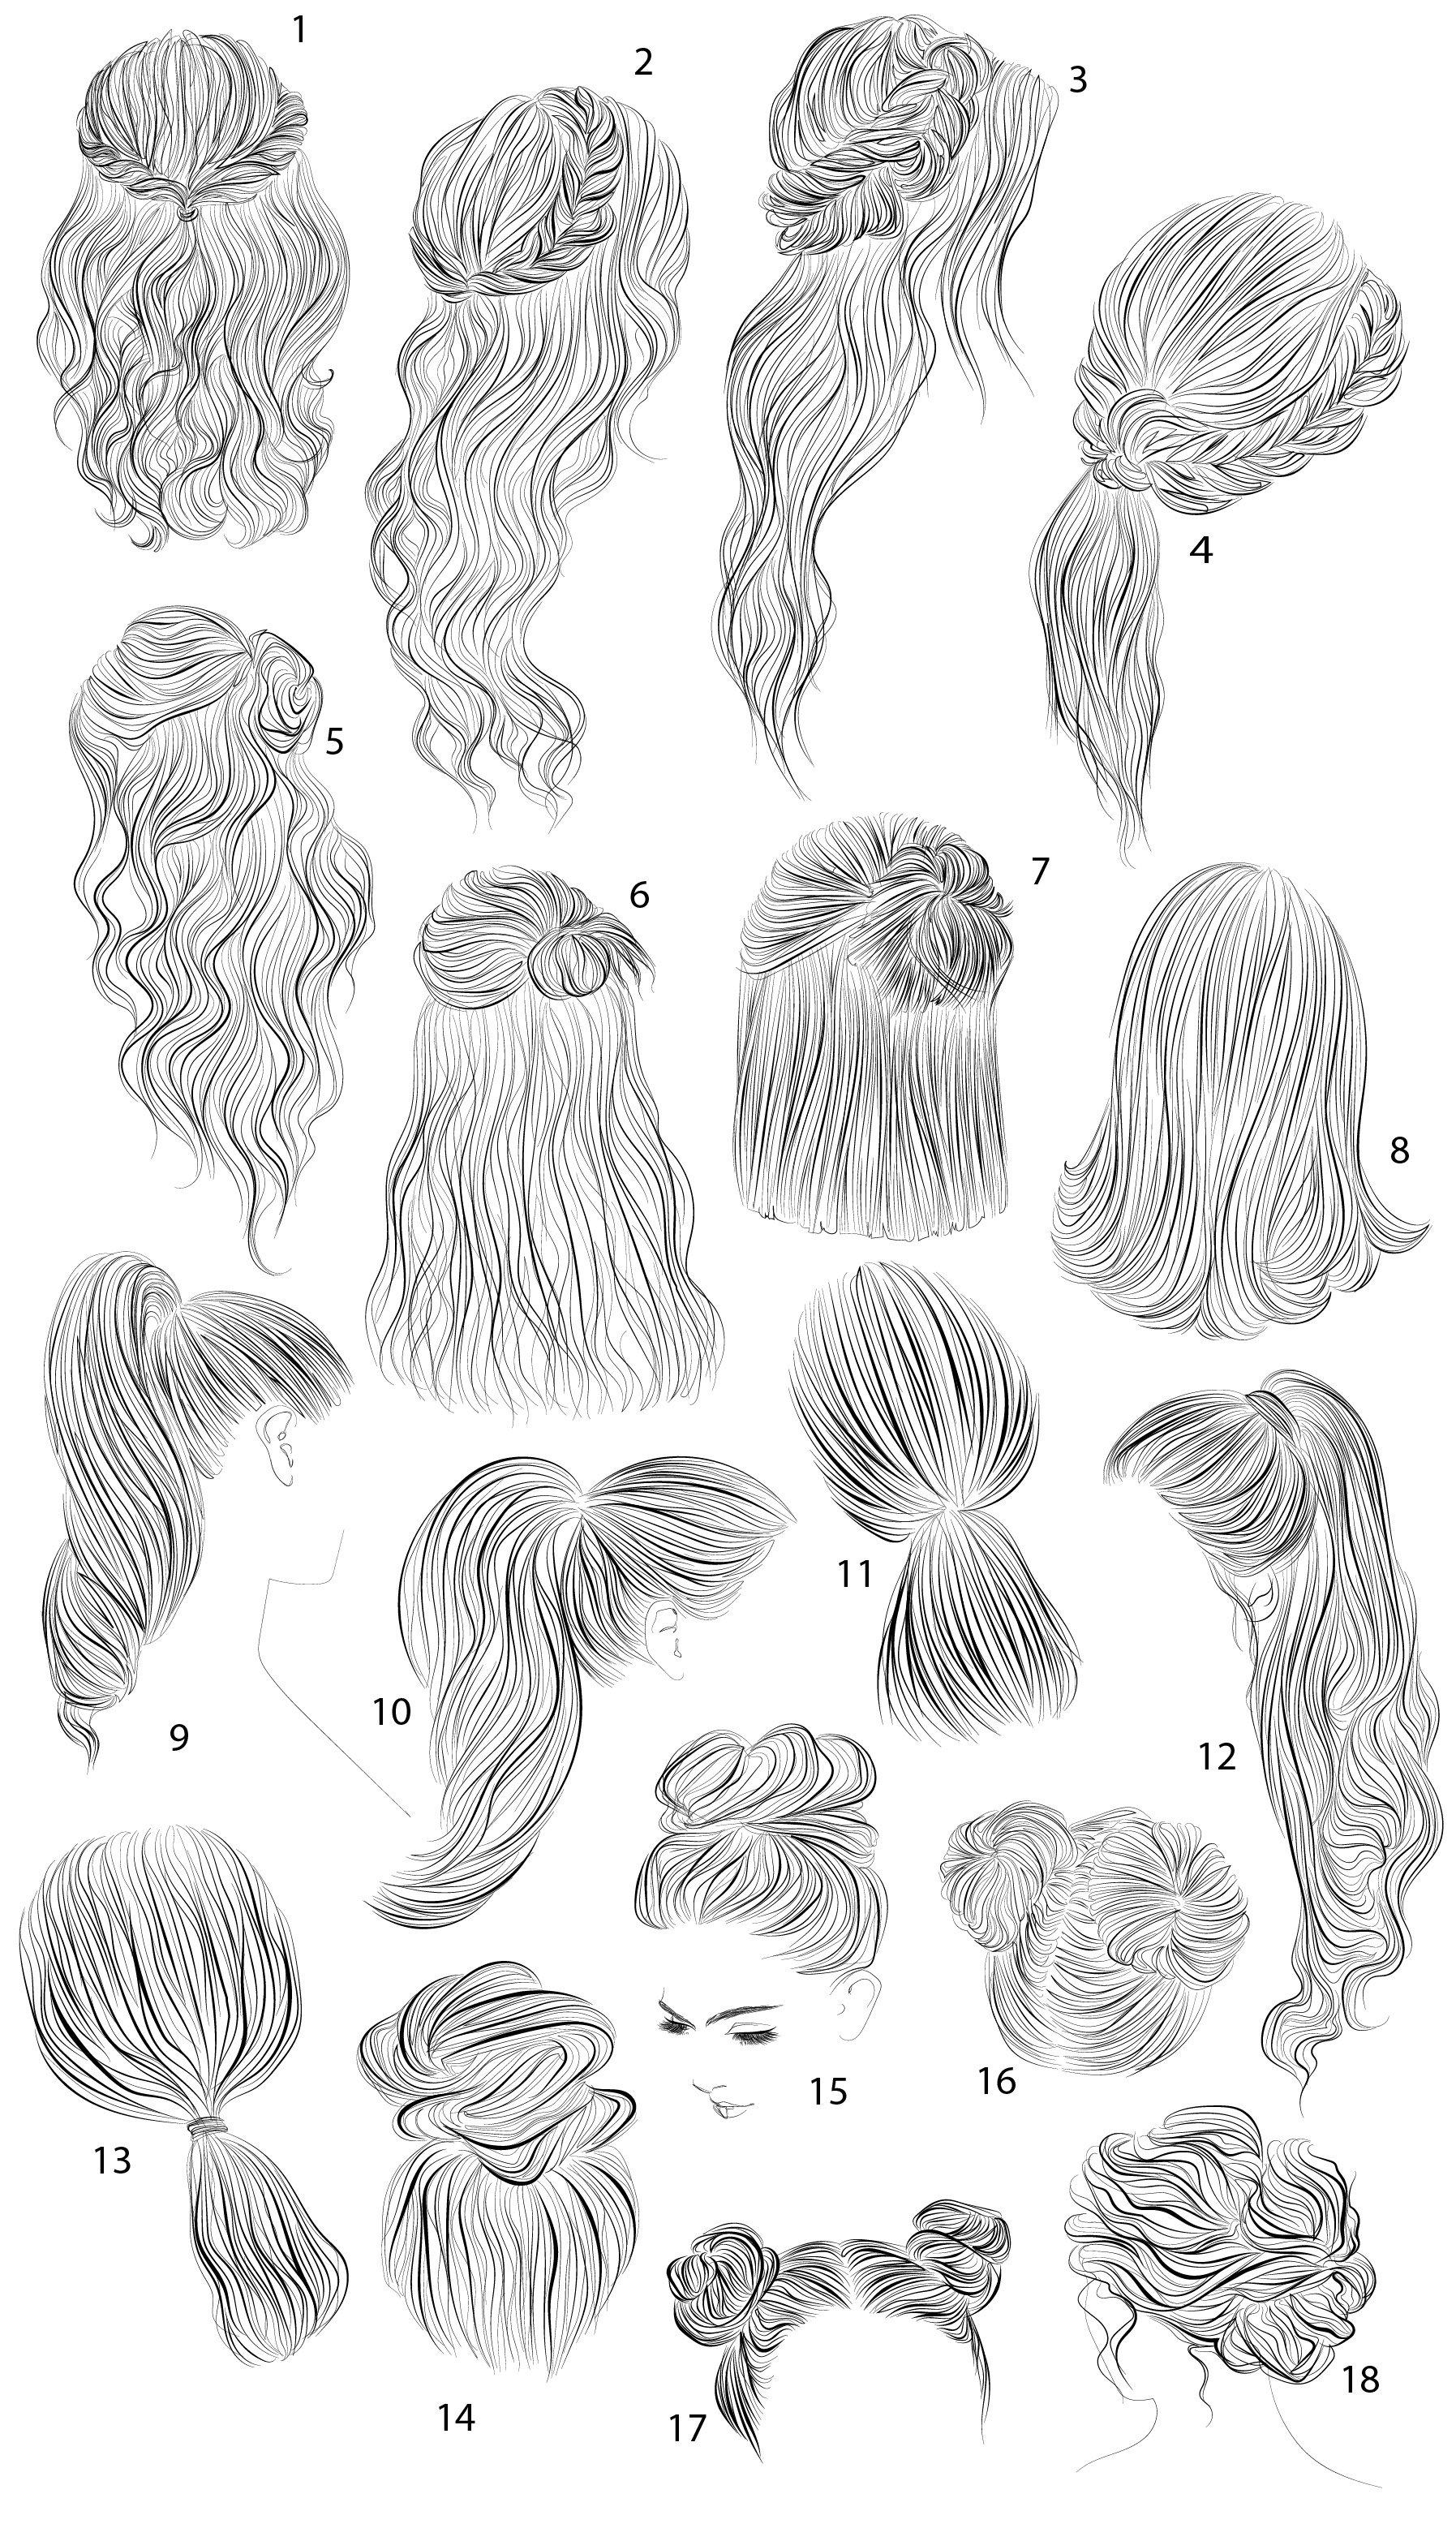 18 vector female hairstyles preview image.